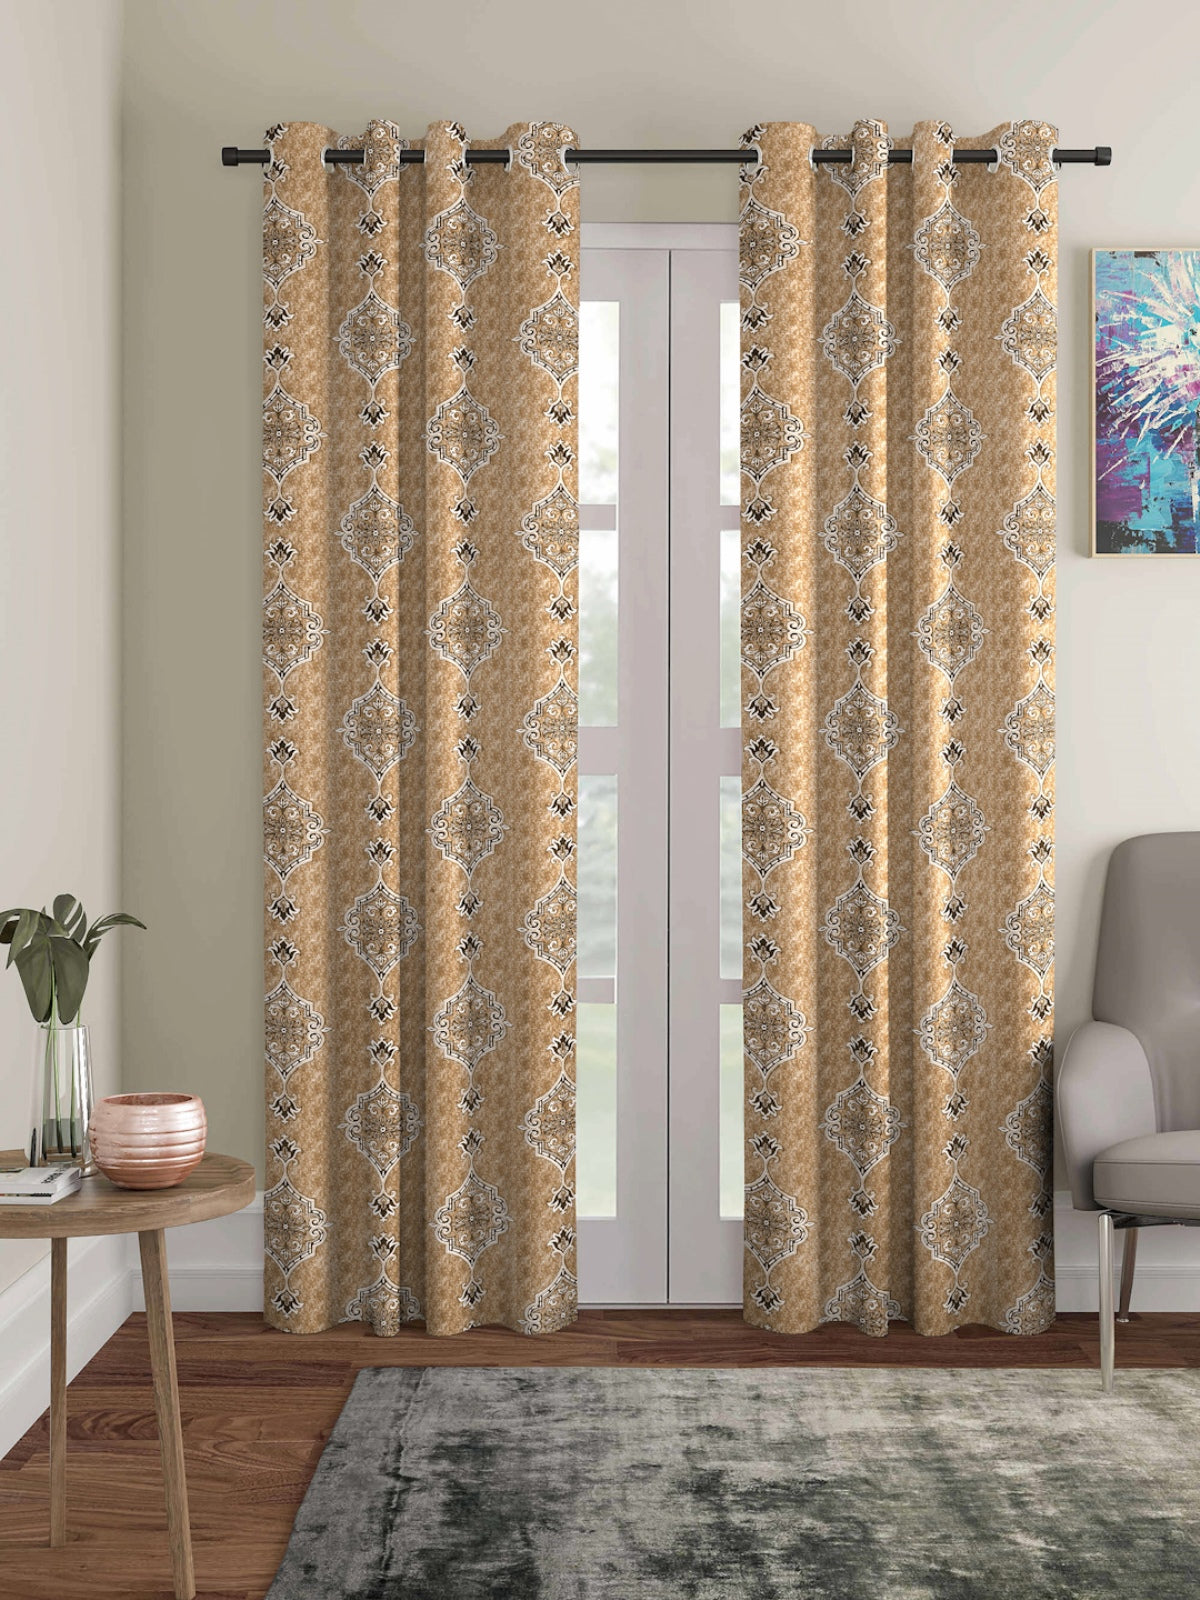 Romee Gold Ethnic Motifs Patterned Set of 2 Door Curtains